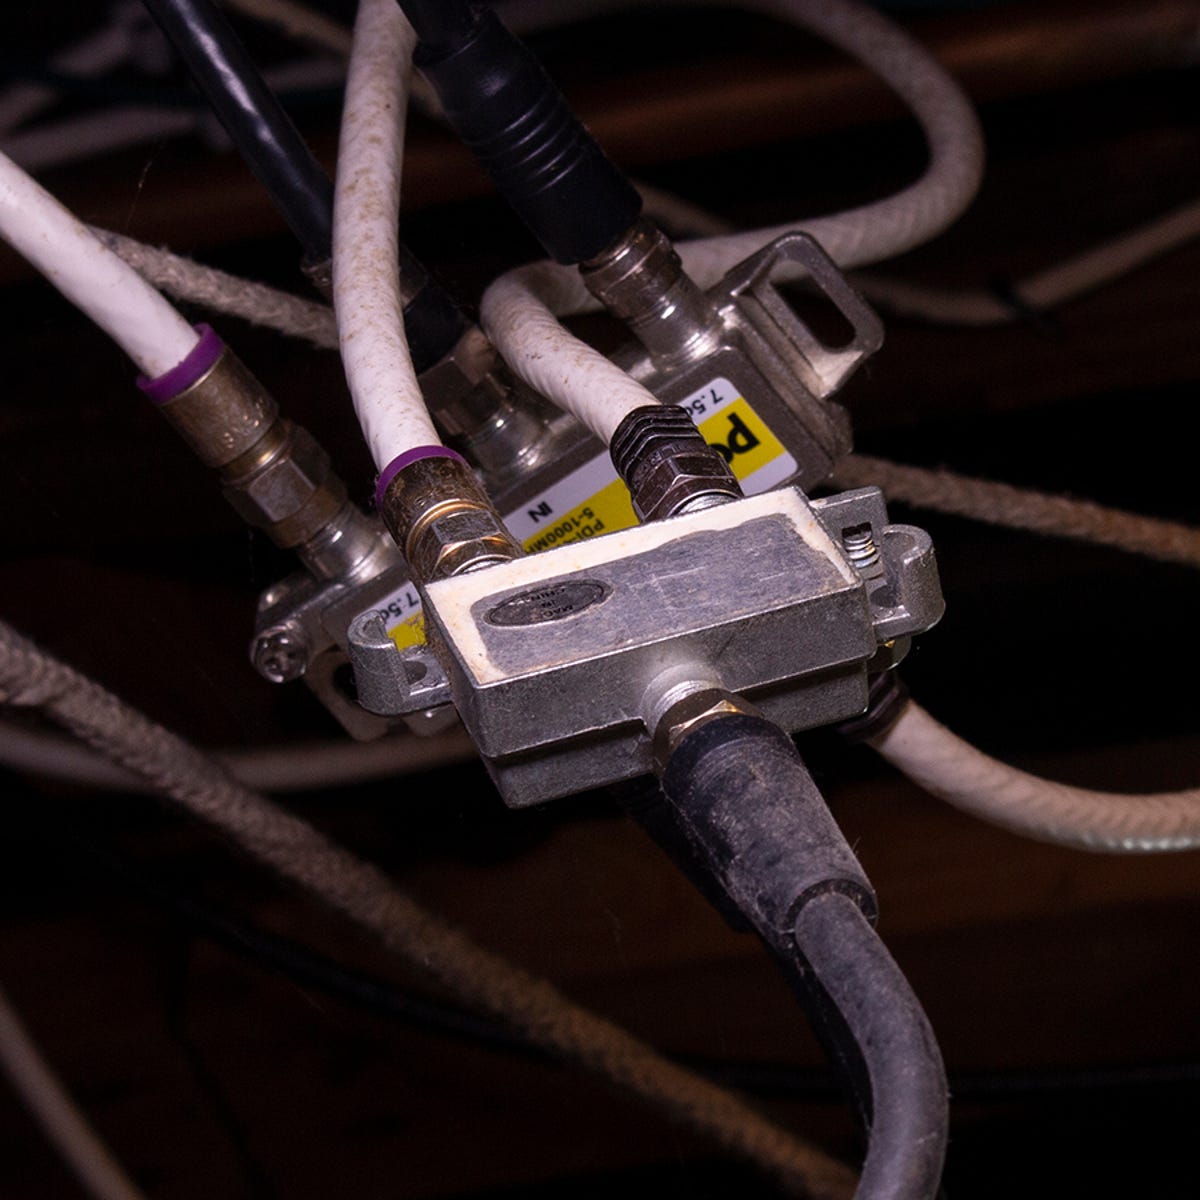 How to convert your old TV cable into powerful Ethernet lines | ZDNET